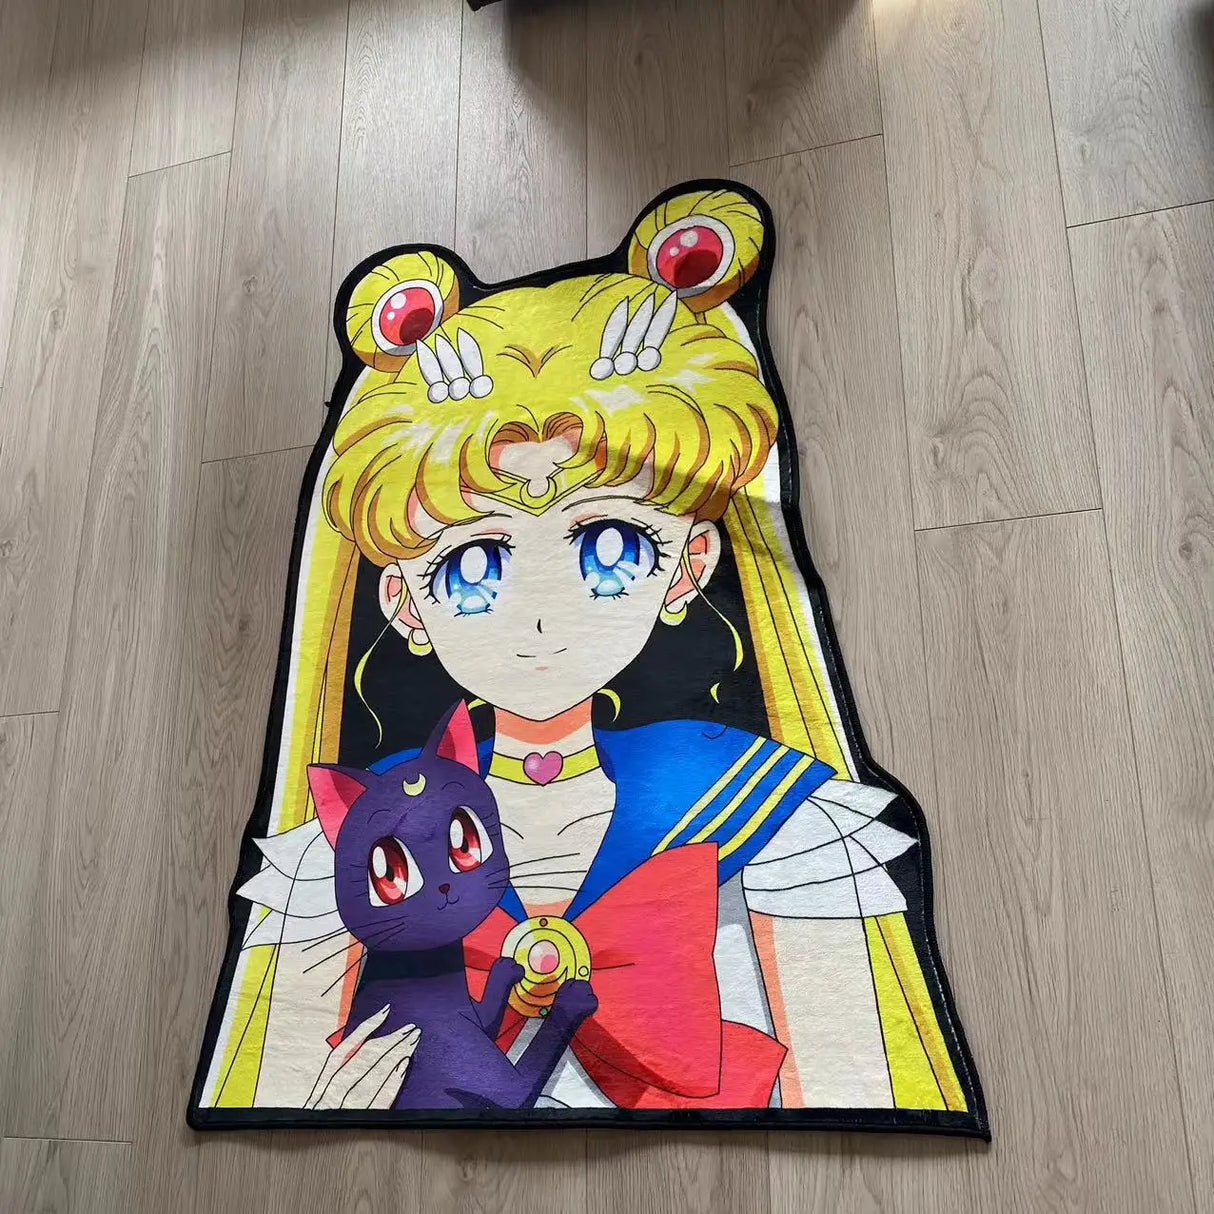 This doormat adds a touch of moonlit your doorstep, making entry a magical experience. If you are looking for more Sailor Merch, We have it all!| Check out all our Anime Merch now!